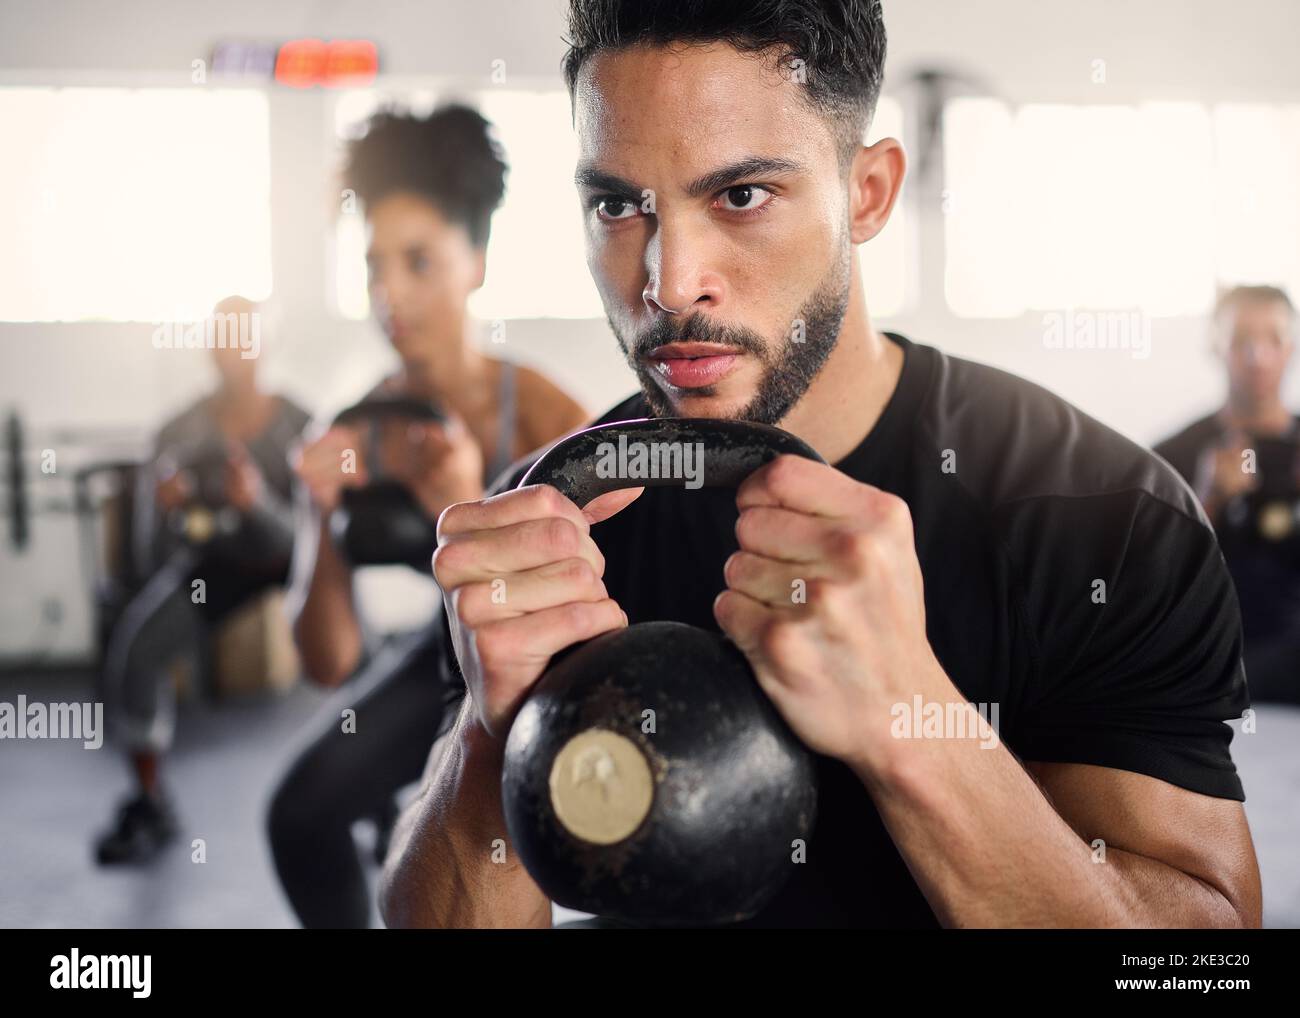 Strong man, personal trainer and group training with kettlebell squat exercise, workout and fitness in gym club. Bodybuilder coach teaching sports Stock Photo